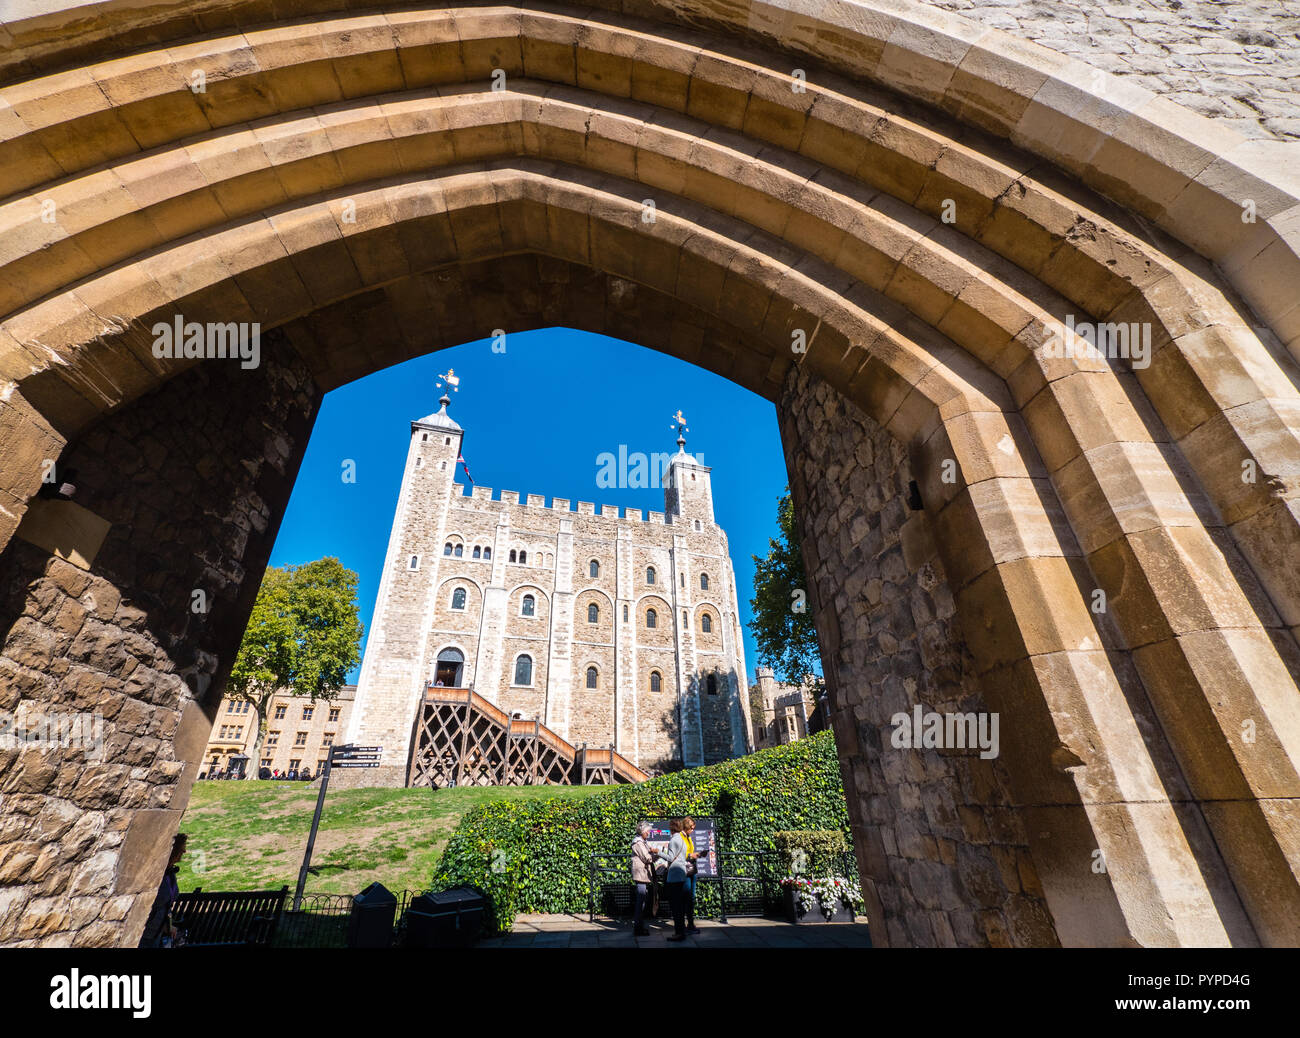 Gateway to Innermost Ward, With White Tower View, Tower of London, London, England, UK, GB. Stock Photo